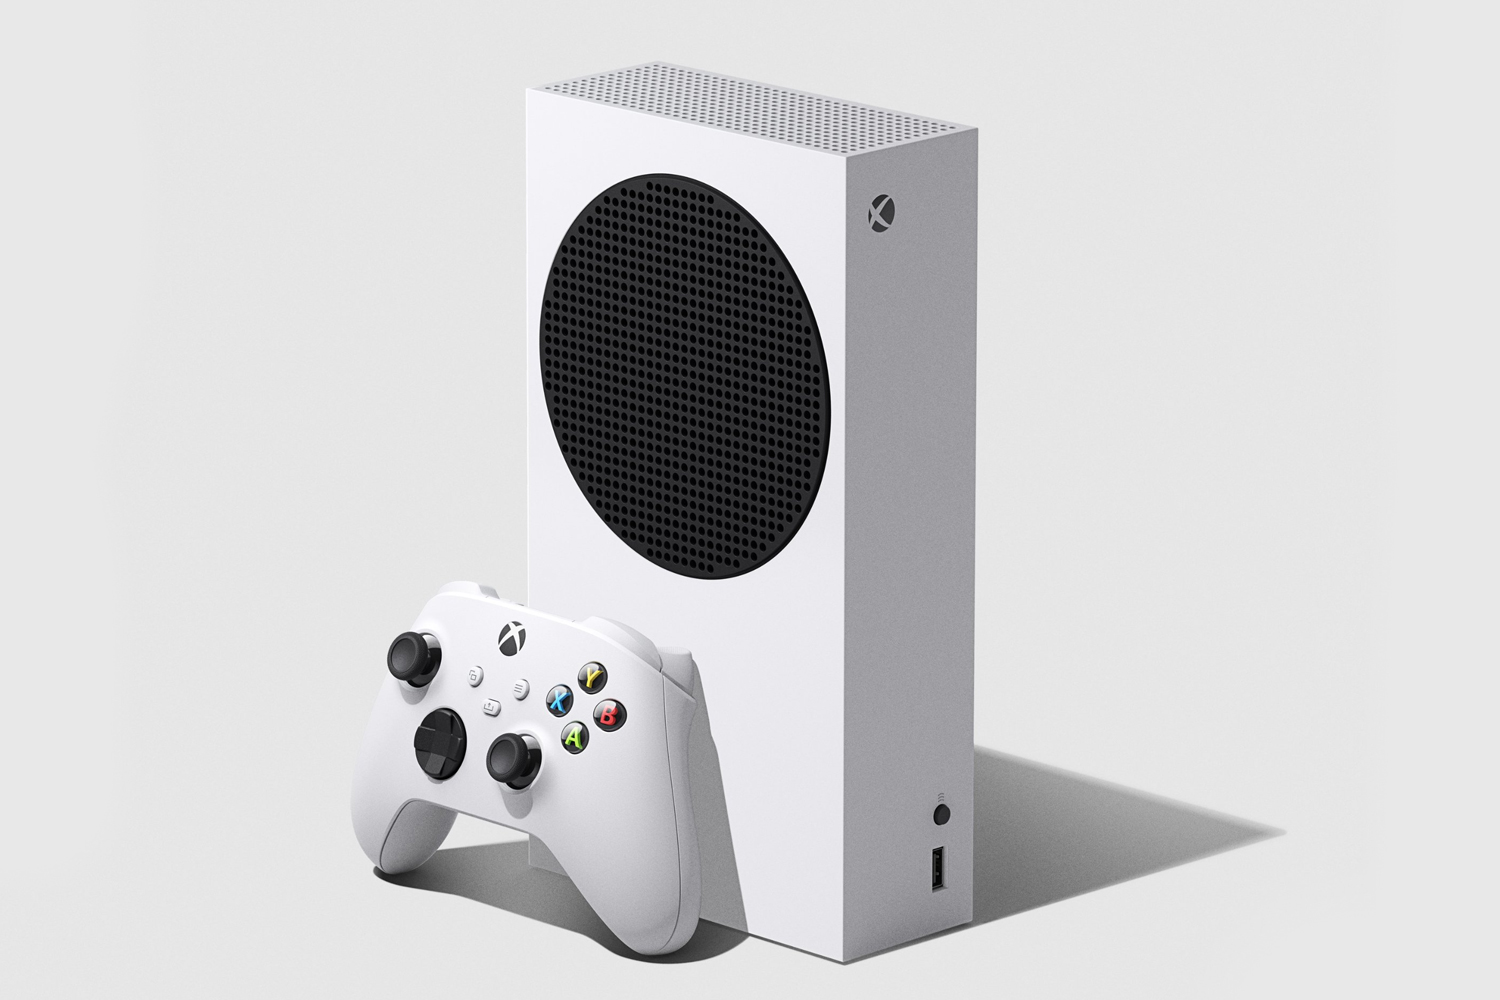 Live now: Save  on the Microsoft Xbox Series S Digital
Edition deal